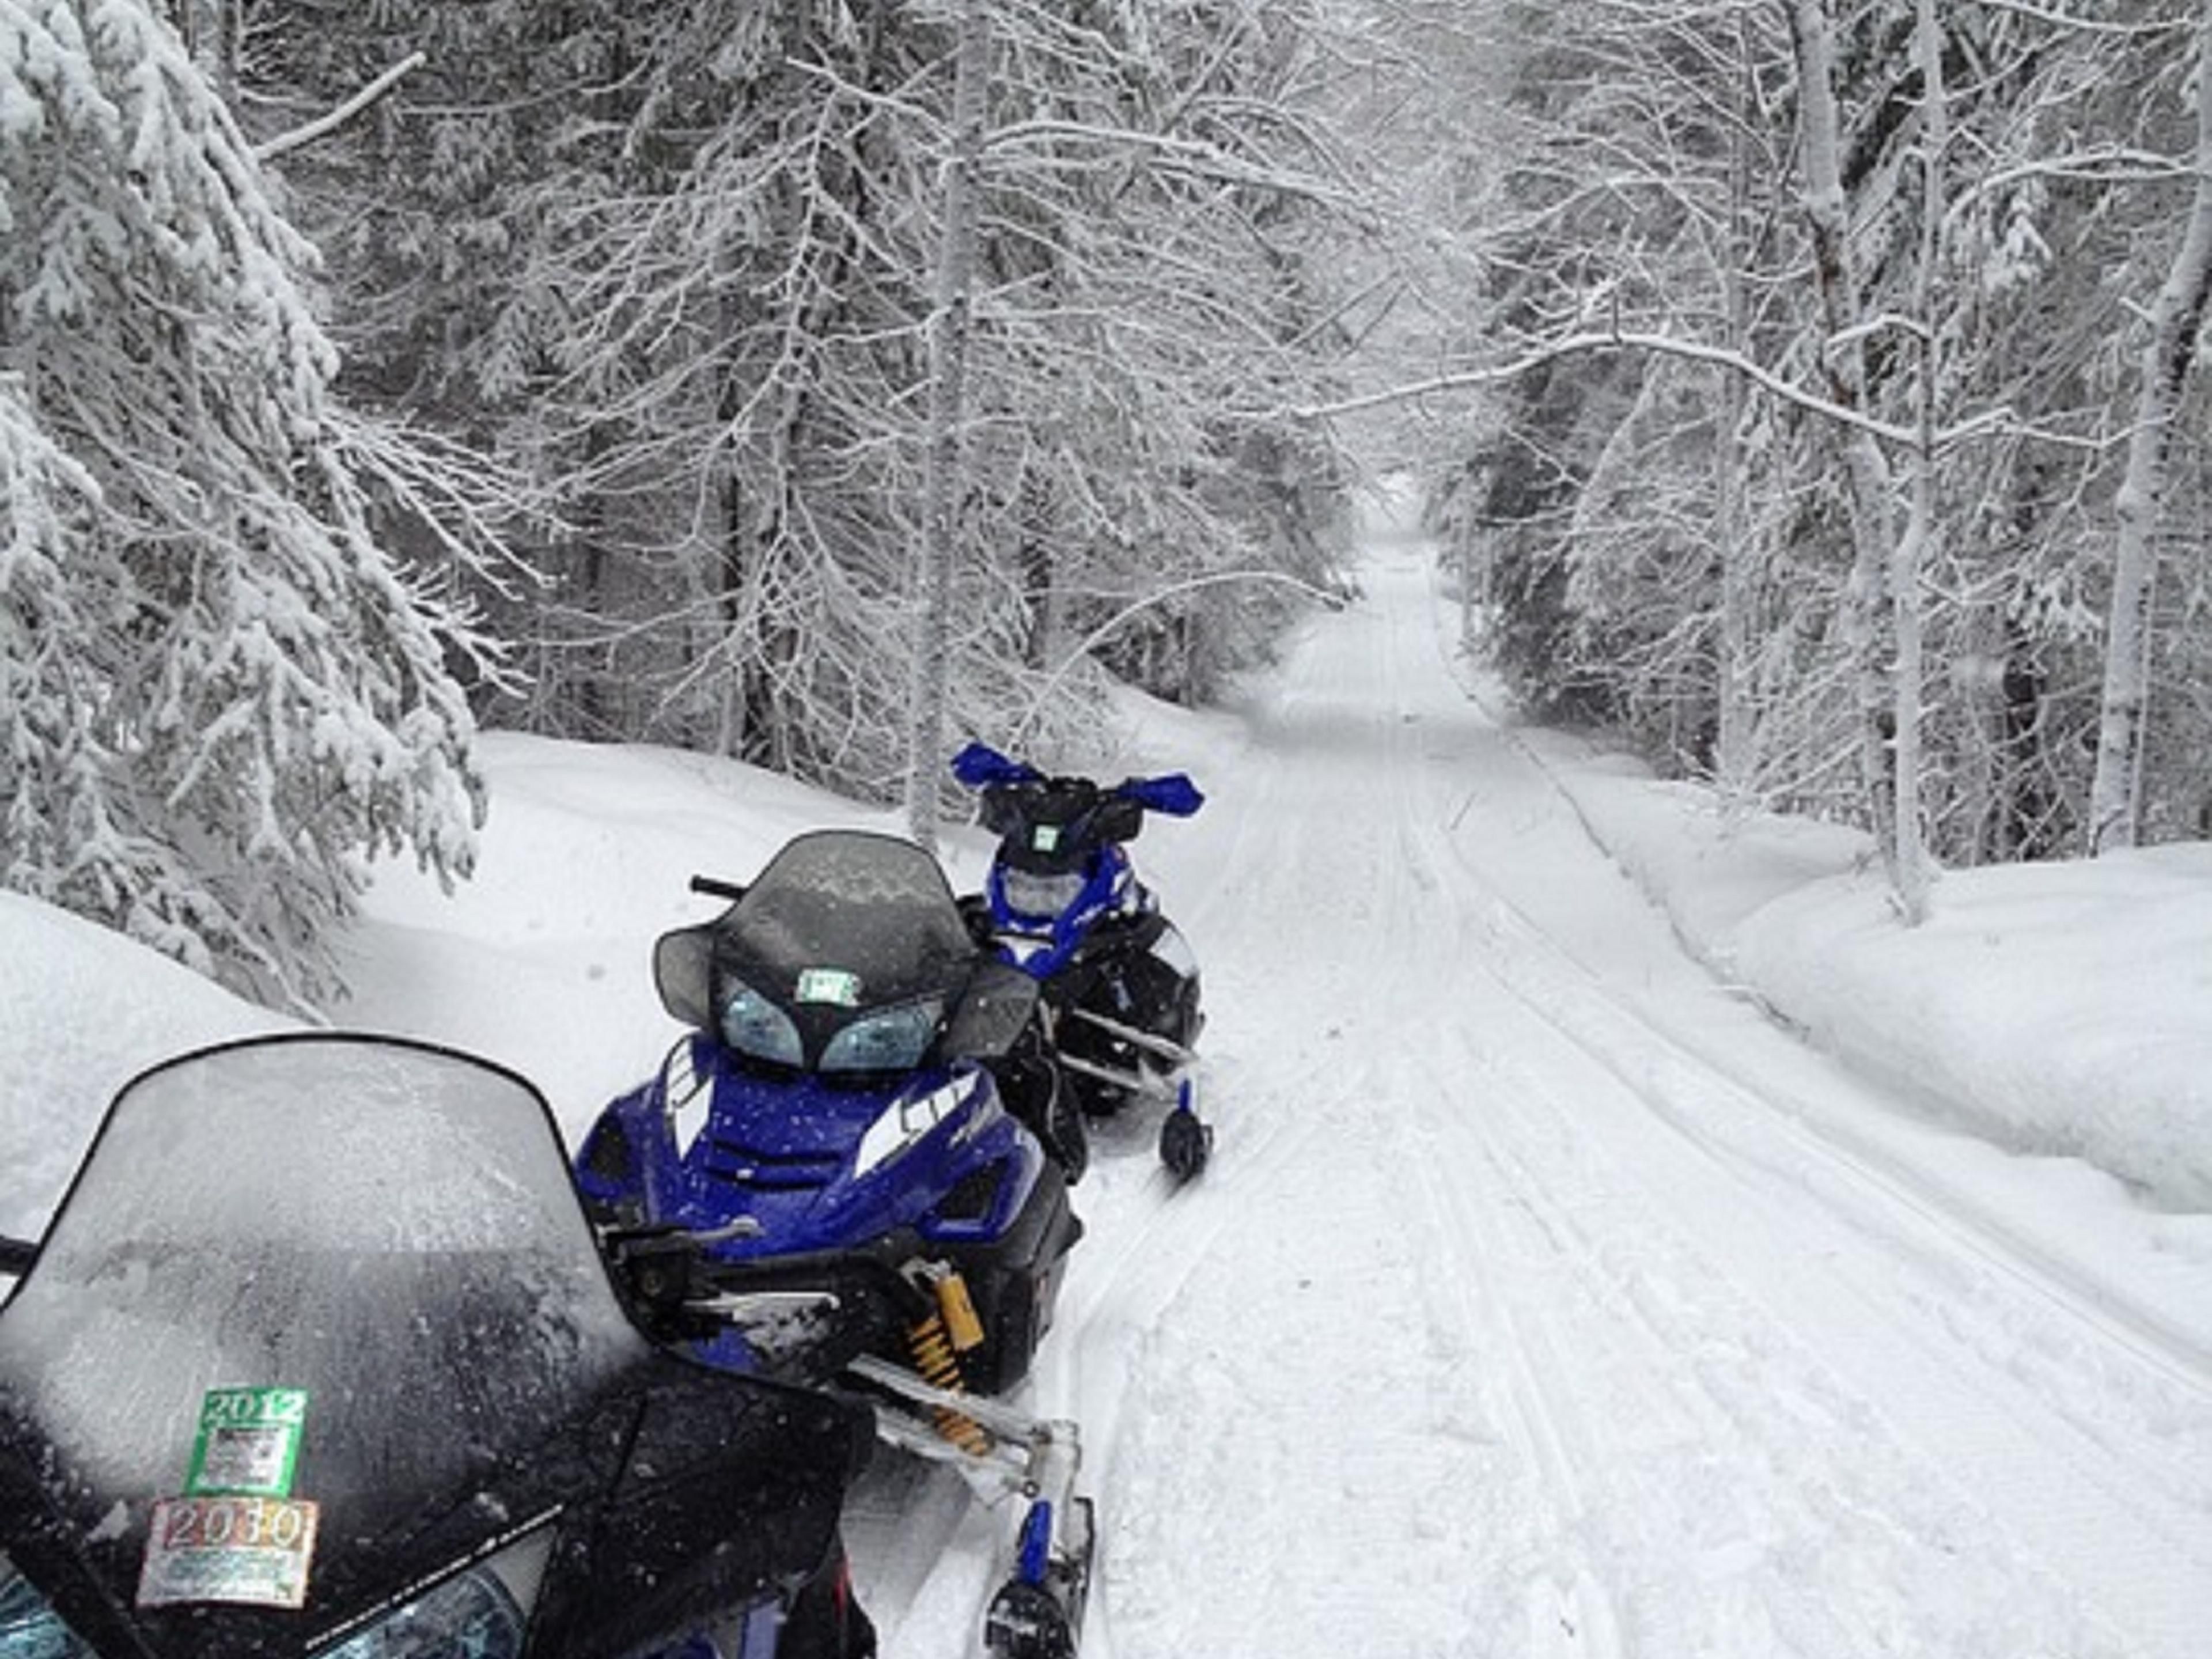 Ontario Fed of Snowmobile Club Rate